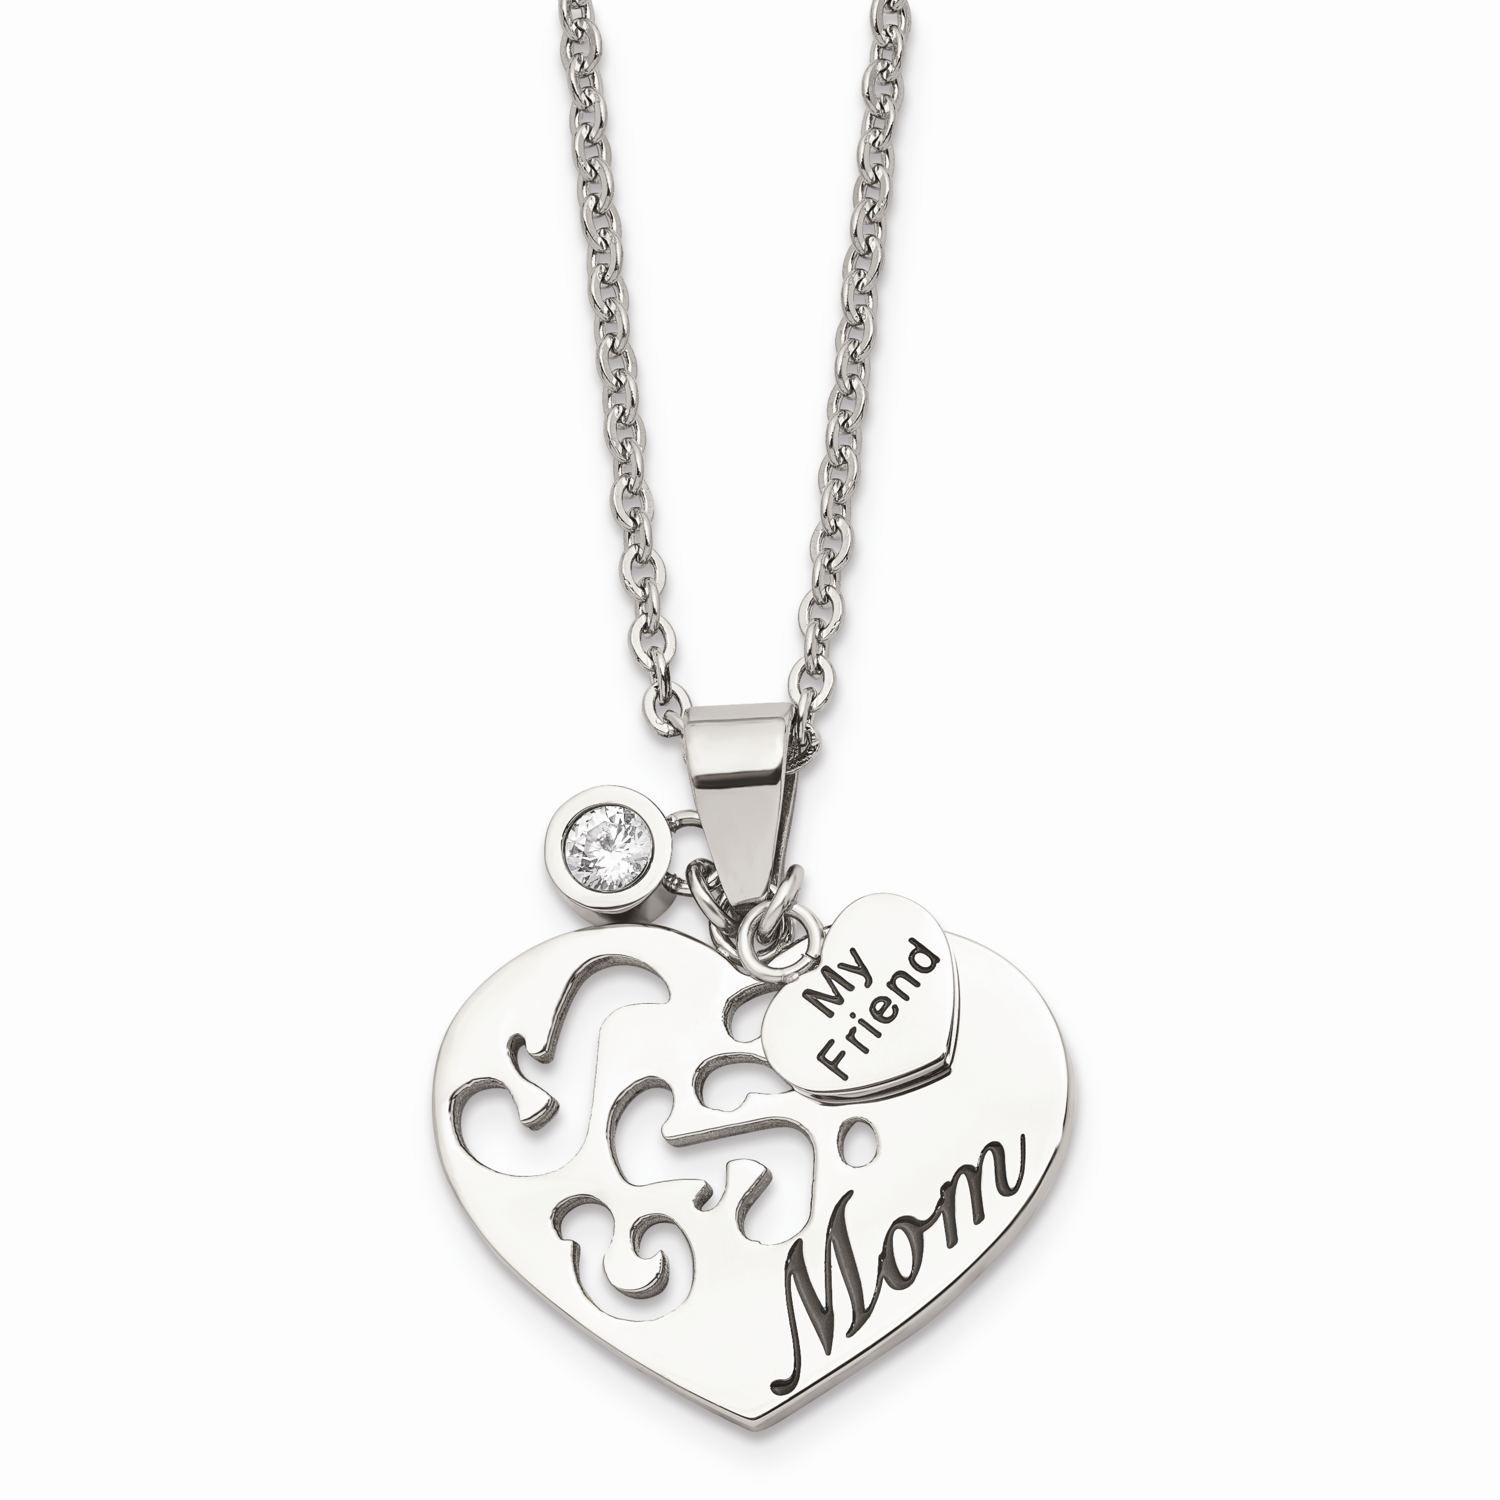 Mom with CZ Stone Stone and My Friend Pendant Necklace Stainless Steel SRN889-24